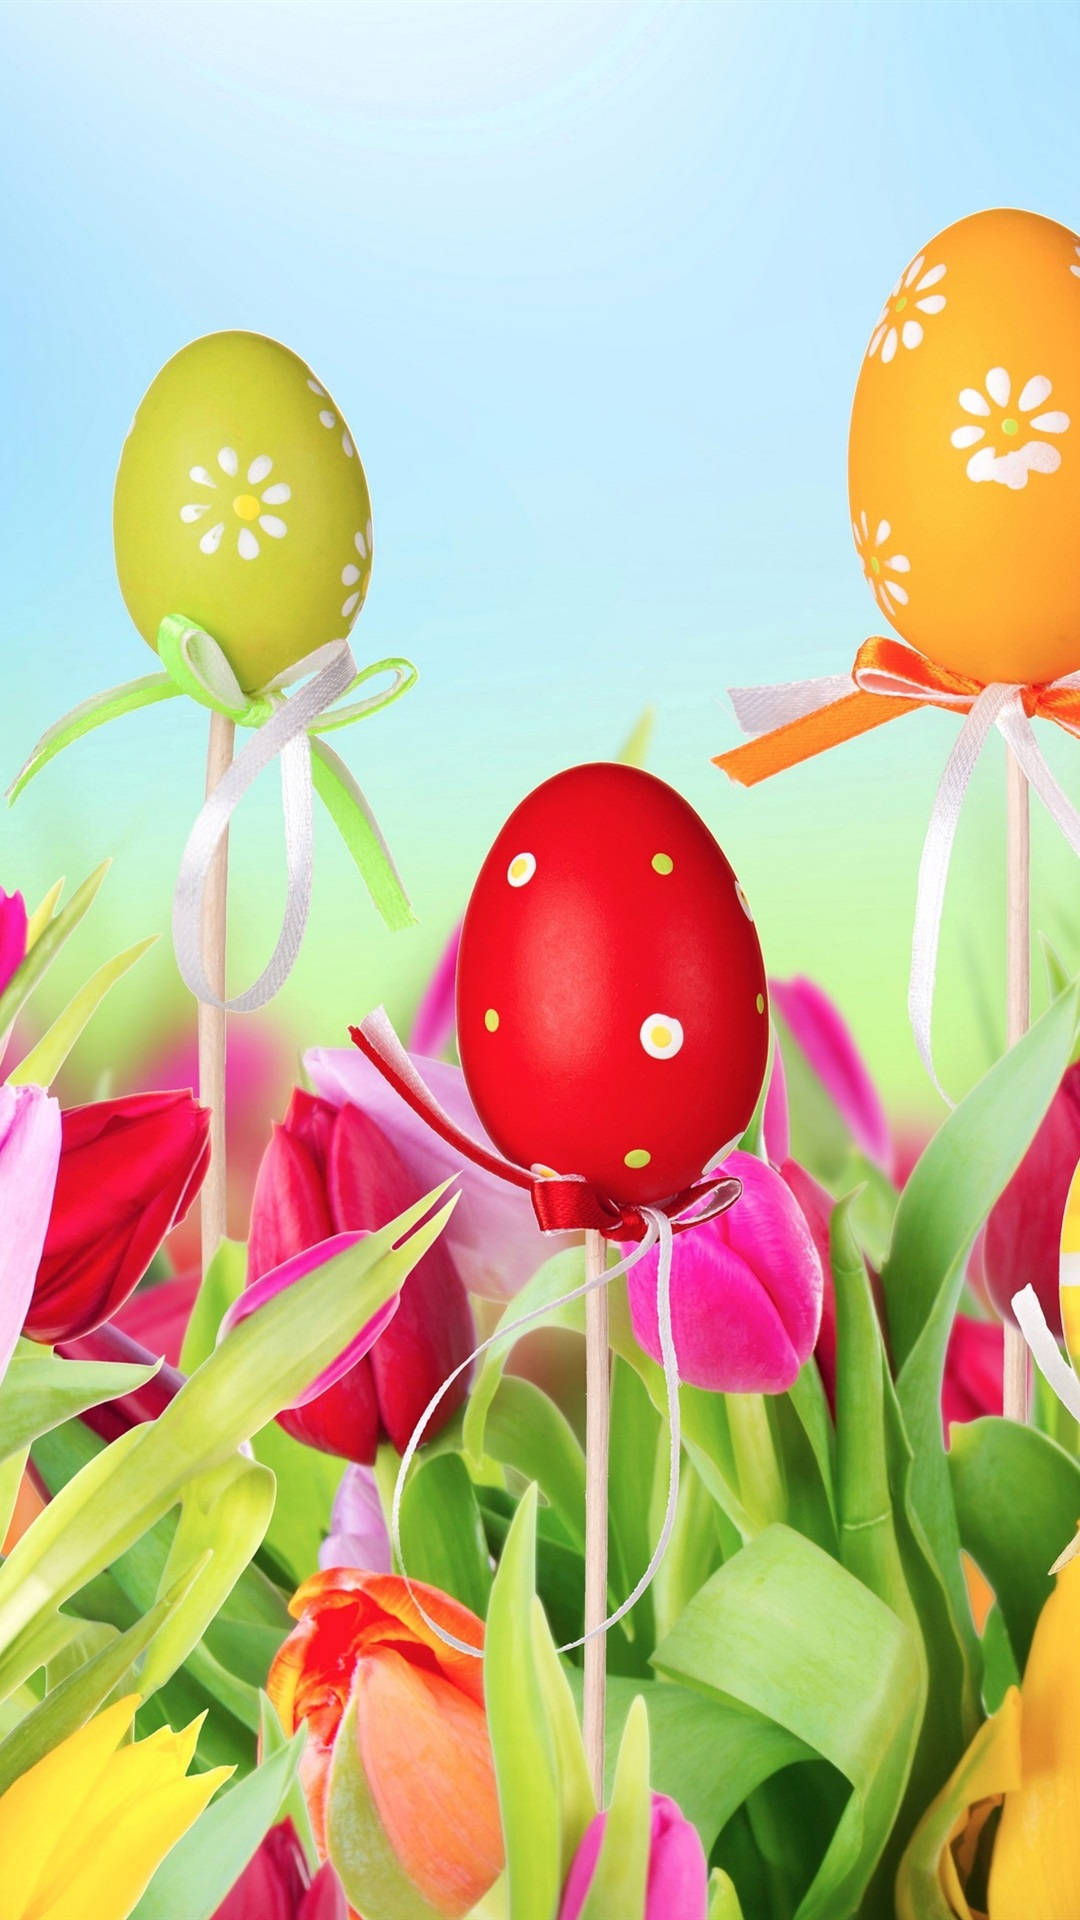 Spread The Joy Of Easter With A New Iphone Background